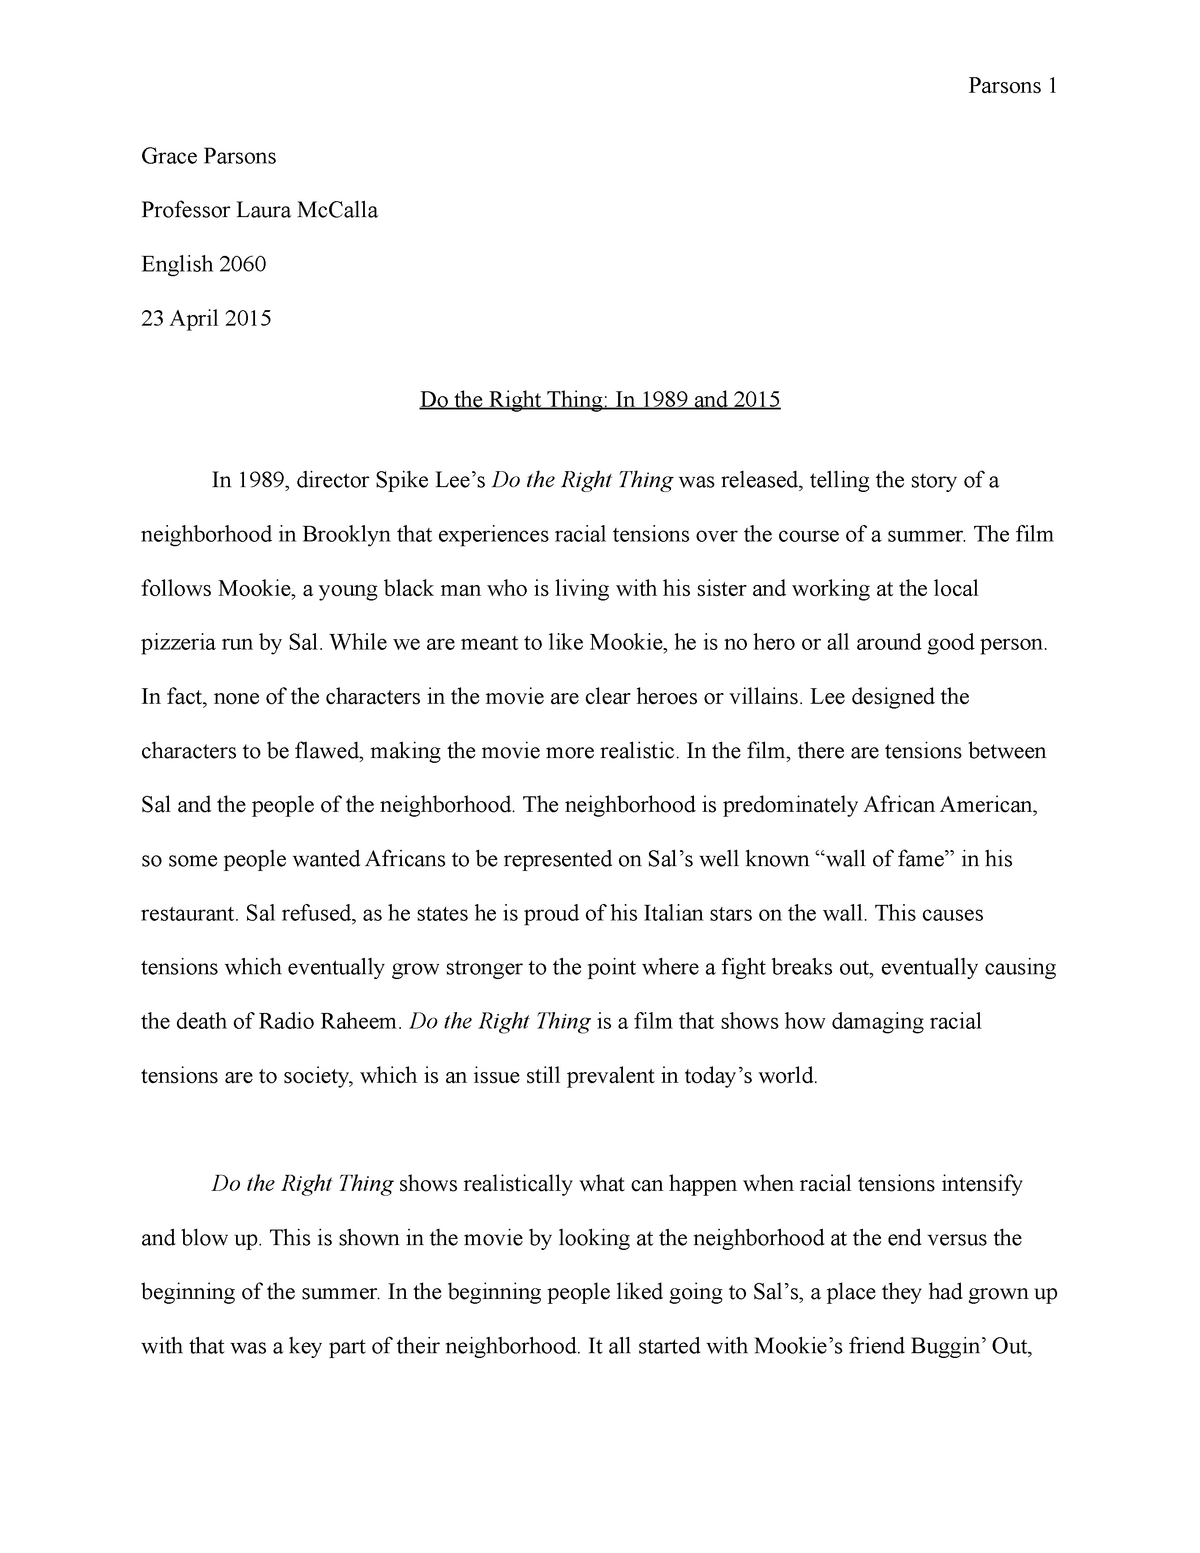 Do The Right Thing Analytical Essay